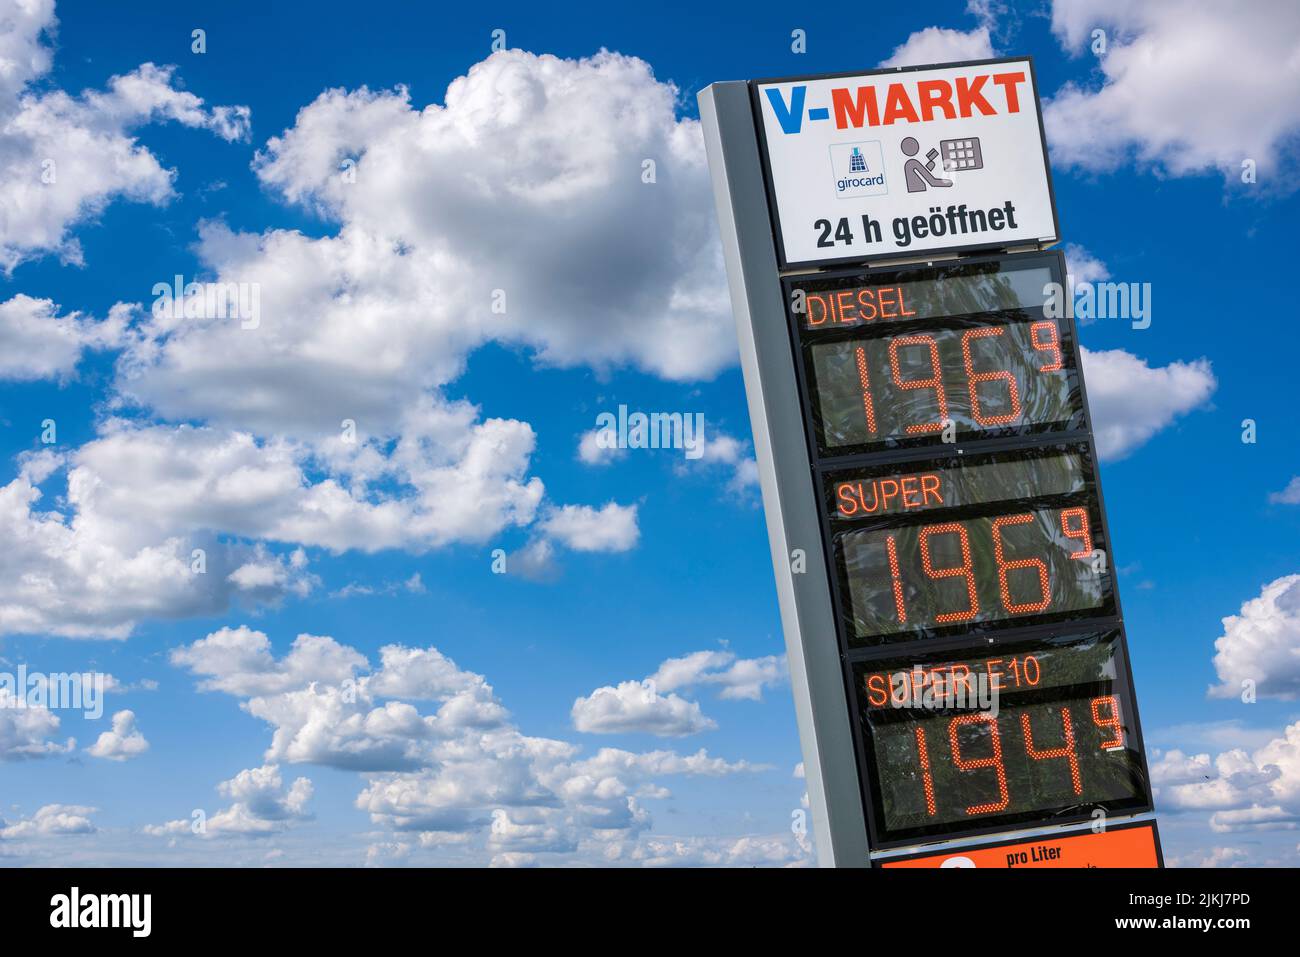 Price display at the gas station at the V-Markt in Schwabmünchen Stock Photo